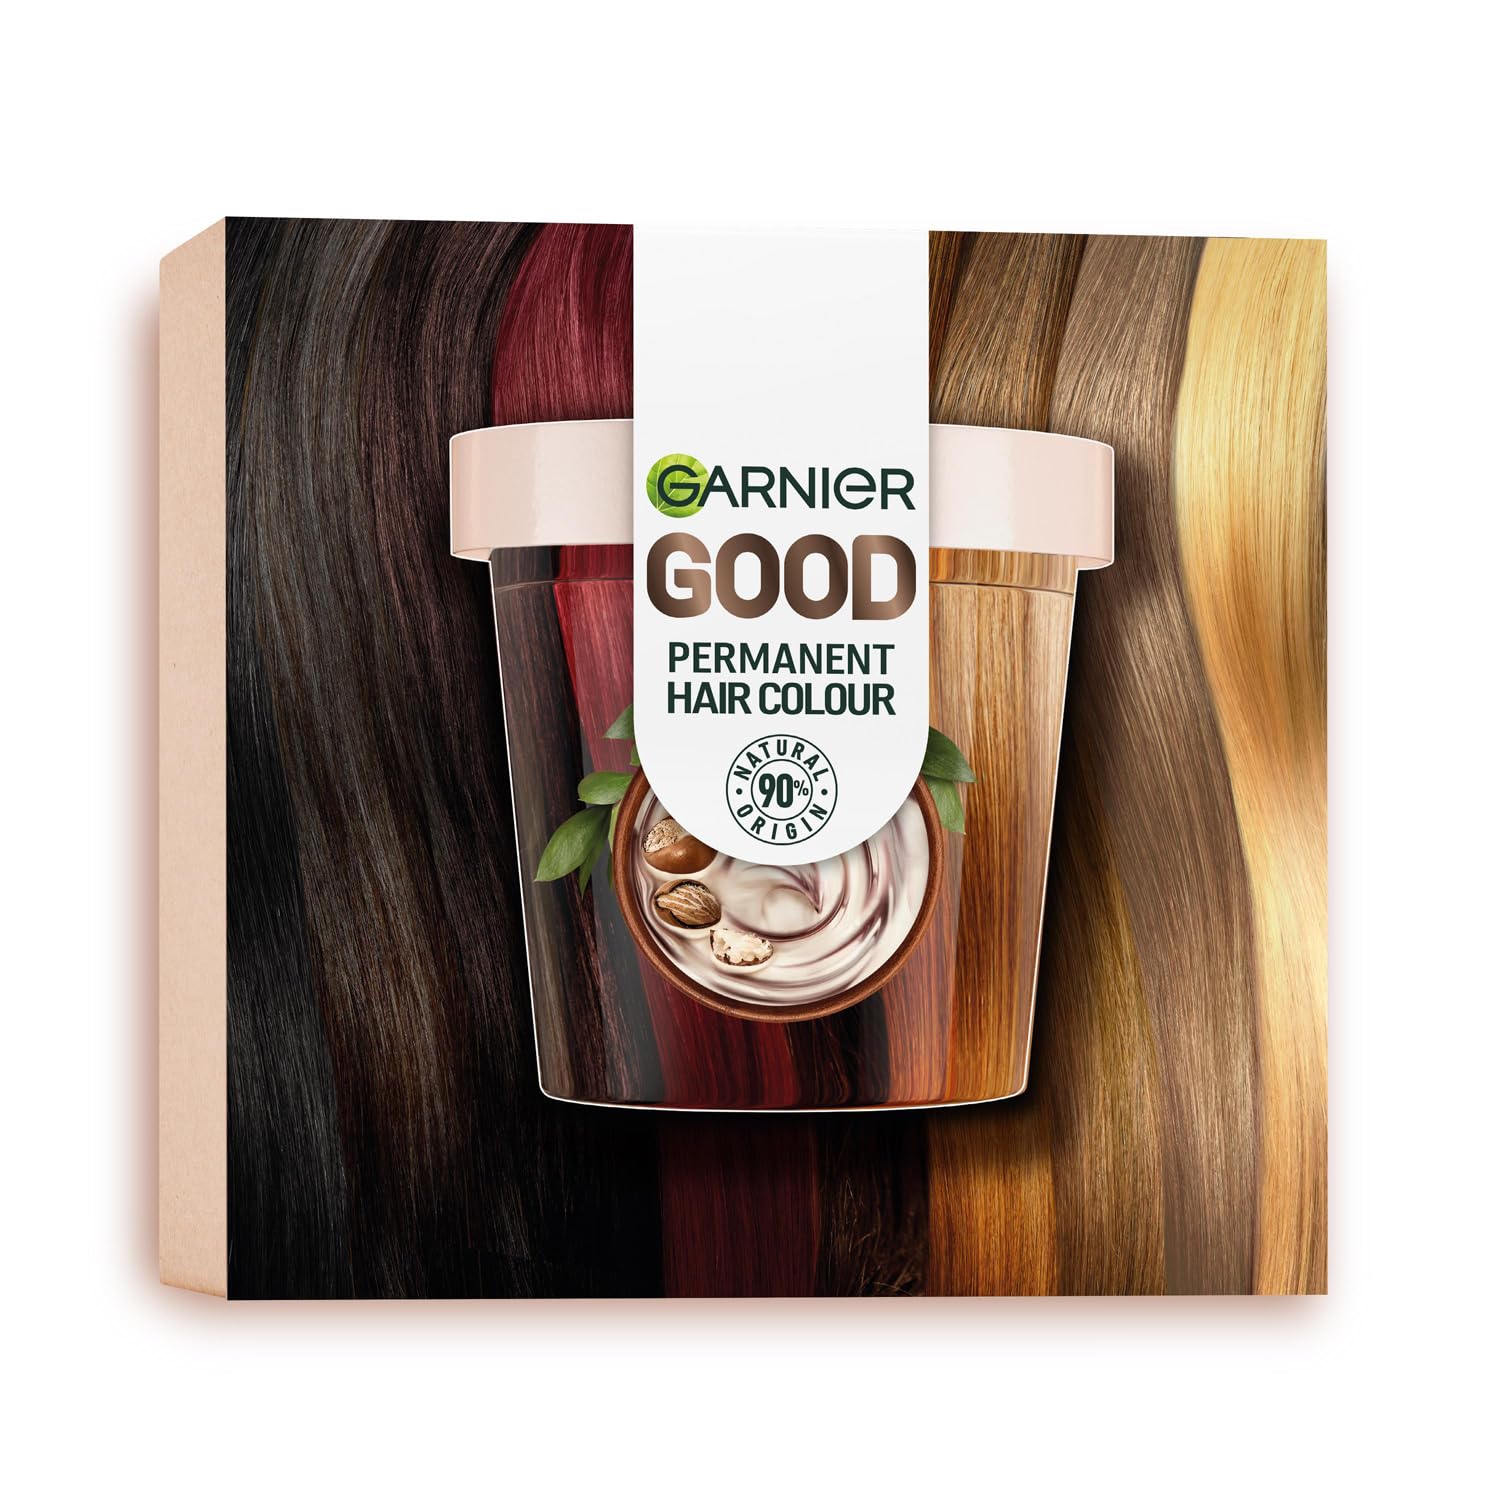 Garnier Permanent Hair Colour, Hard Dye Set for Intense and Long-Lasting Hair Colour, Colouration for up to 8 Weeks of Radiant Colour, No Ammonia, 4.15 Cool Chestnut Brown, Good Starter Set